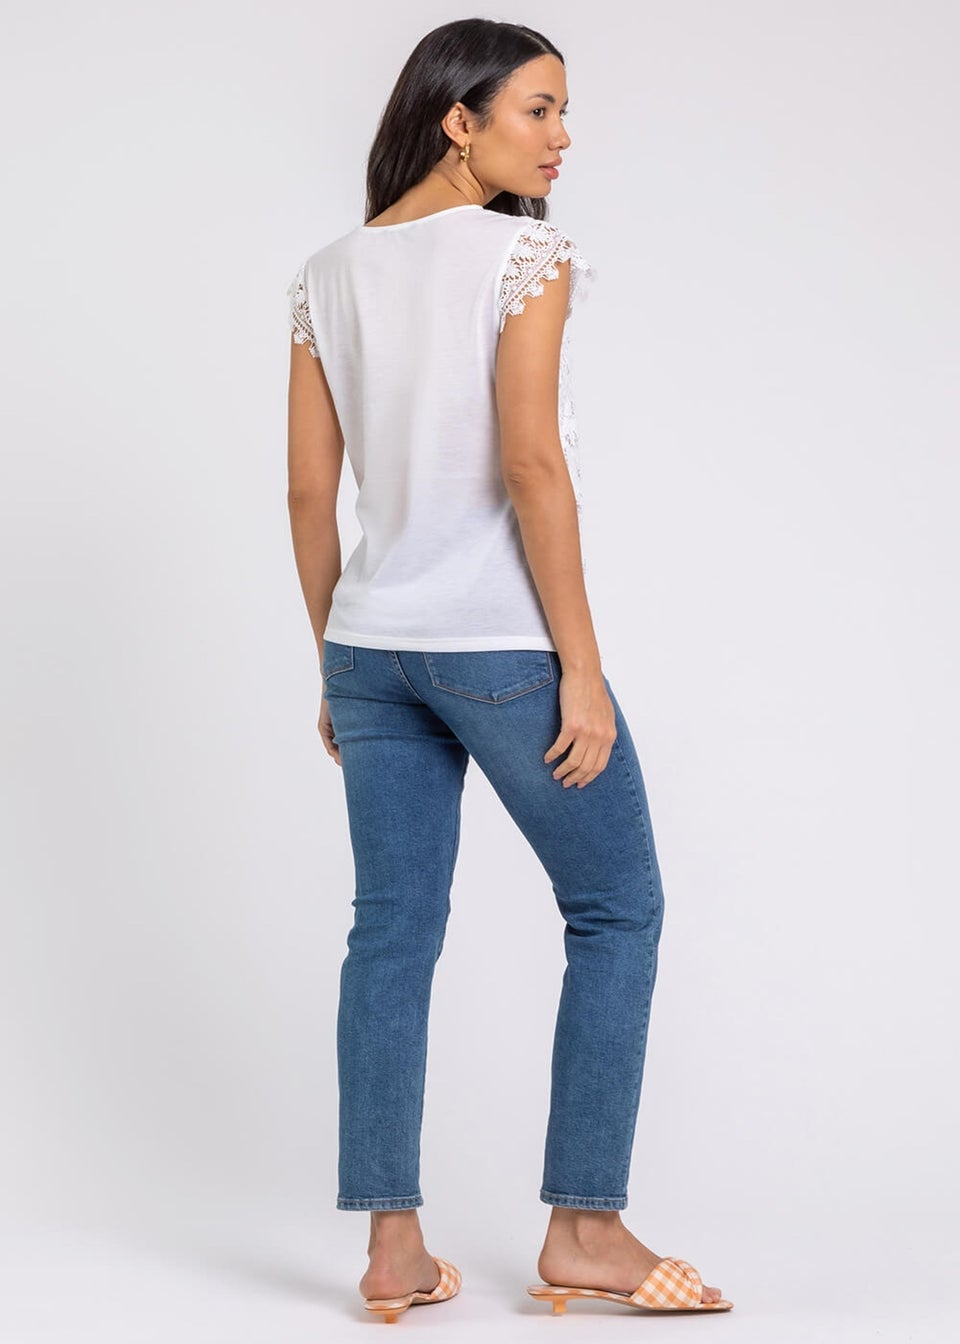 Roman Ivory Butterfly Lace Stretch Top